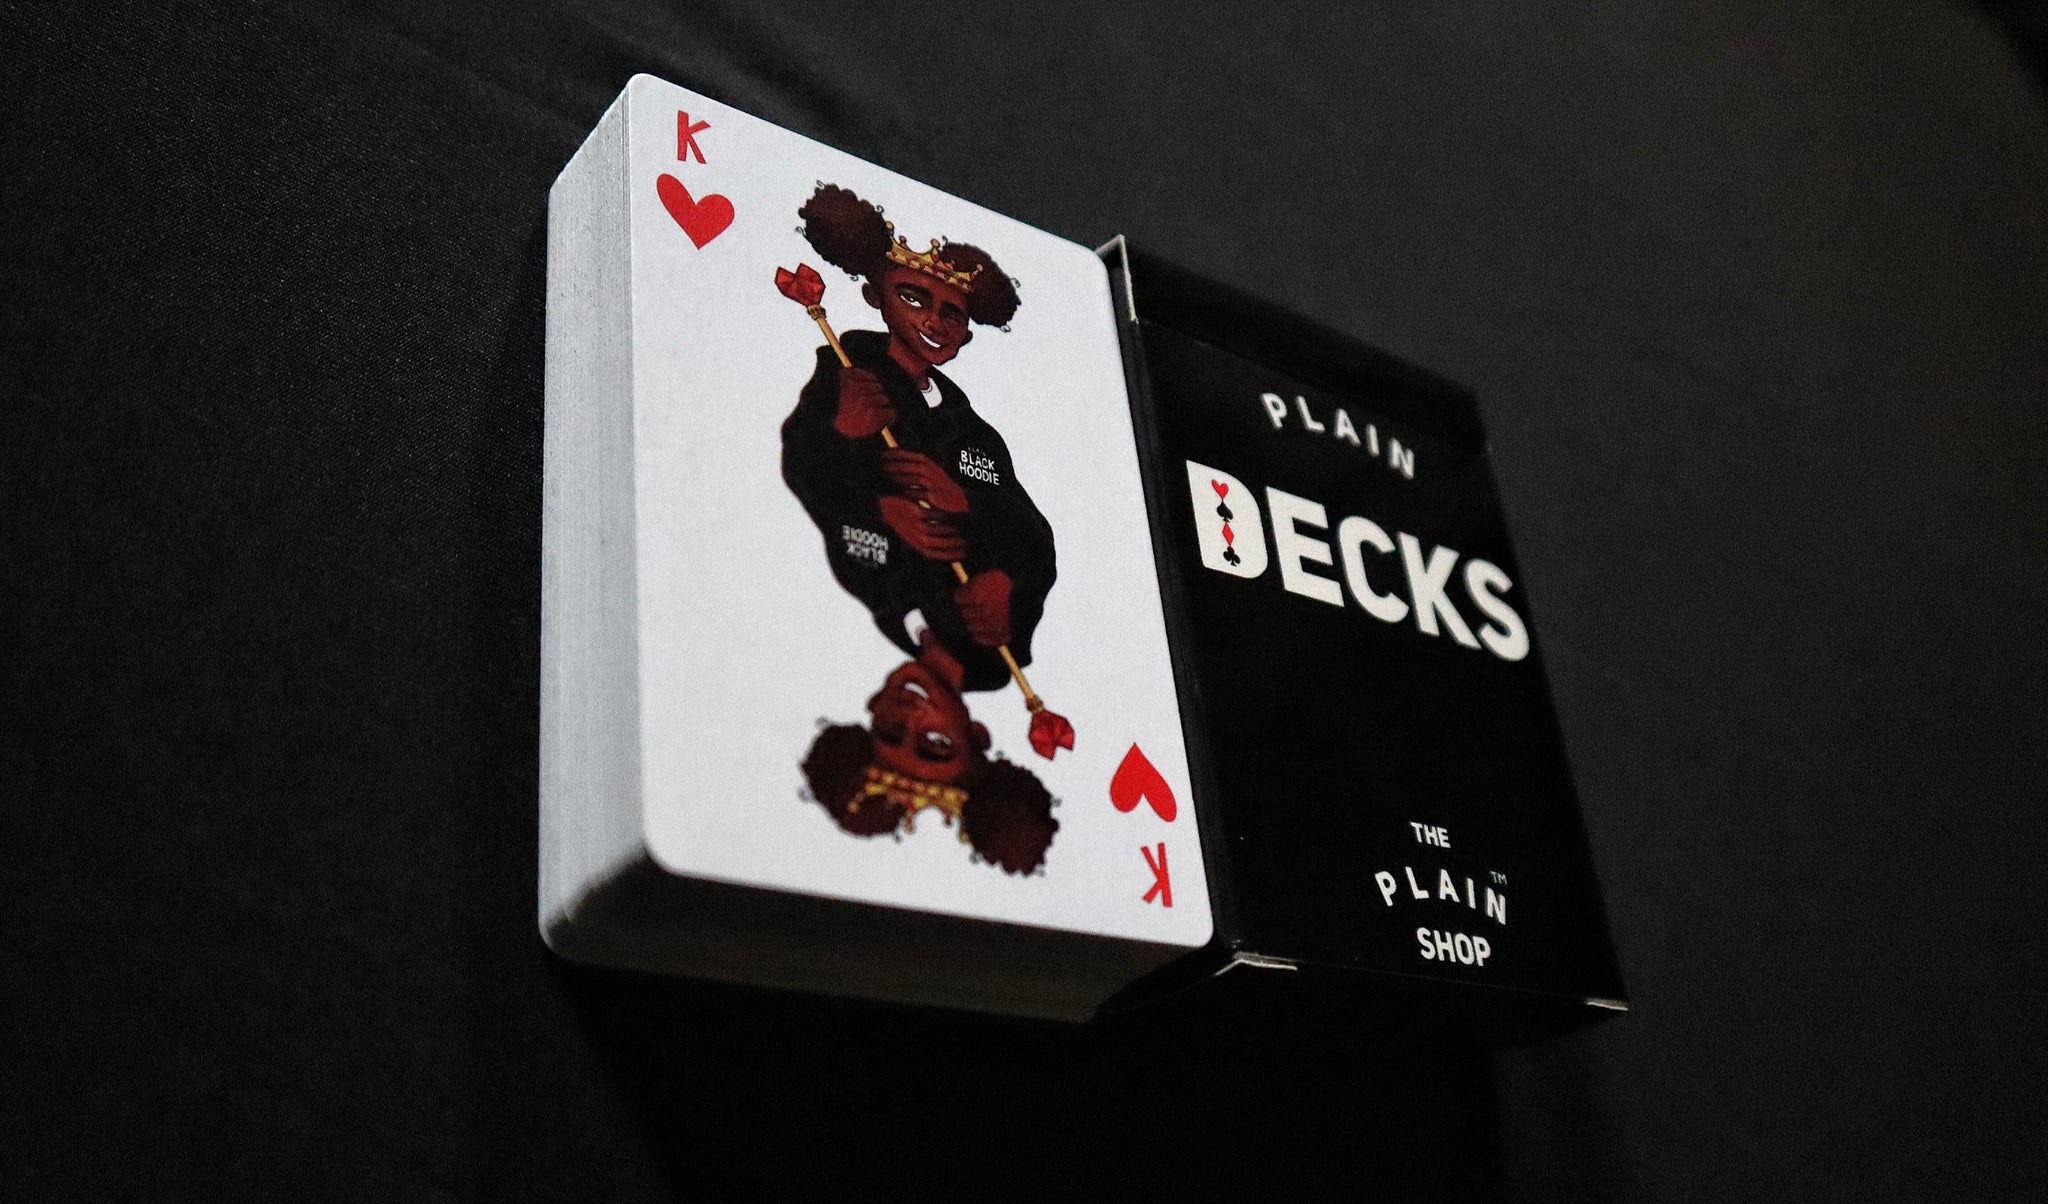 plain decks, plain black cards, black people on playing cards, bespoke playing cards, high quality playing cards, it is what it is, king of hearts, the plain shop